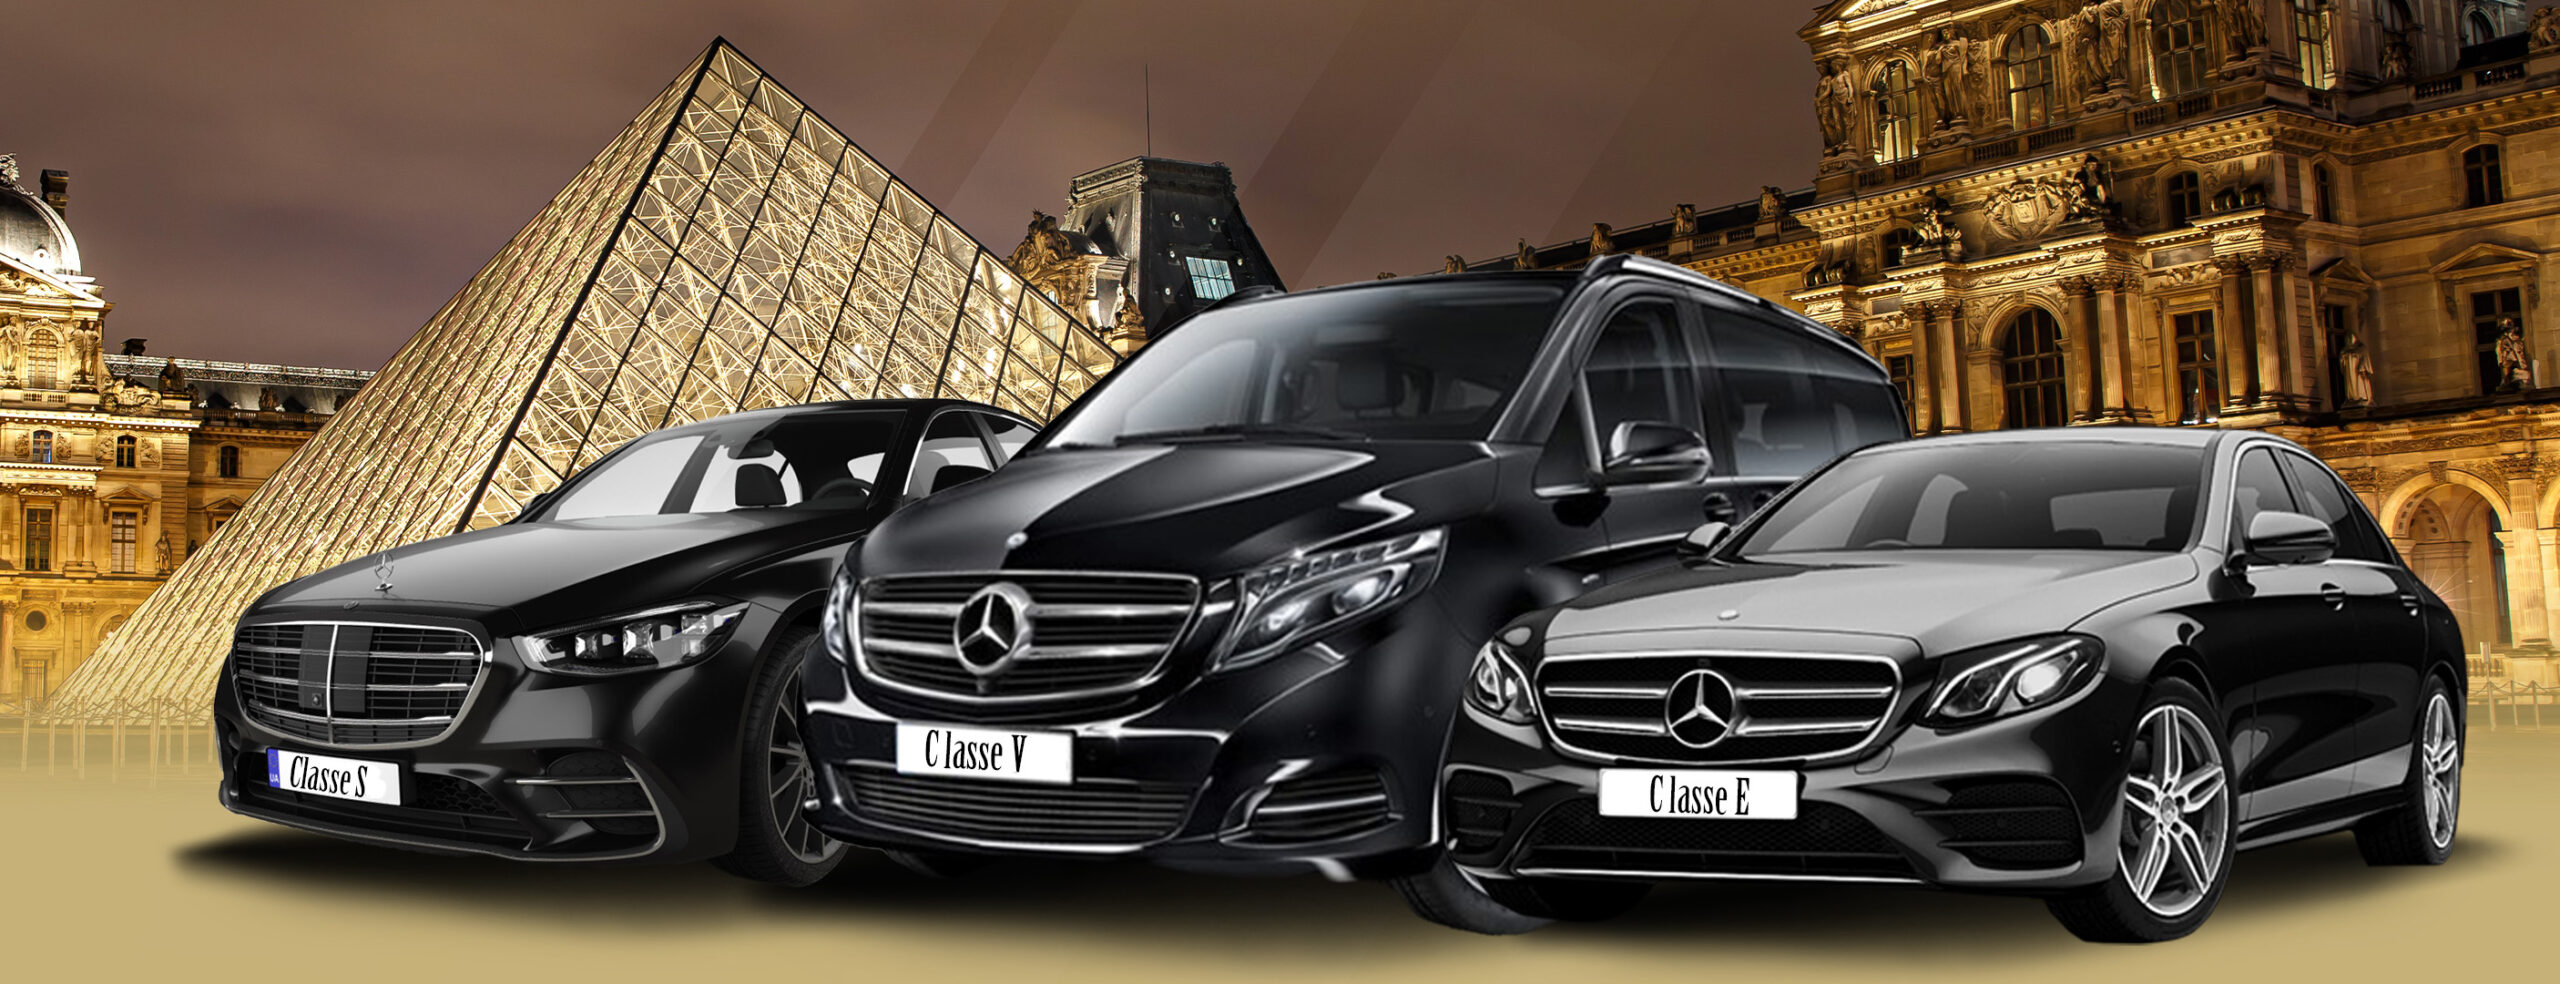 paris by ls provide luxury chauffeurs with e class s class and v class mercedes benz